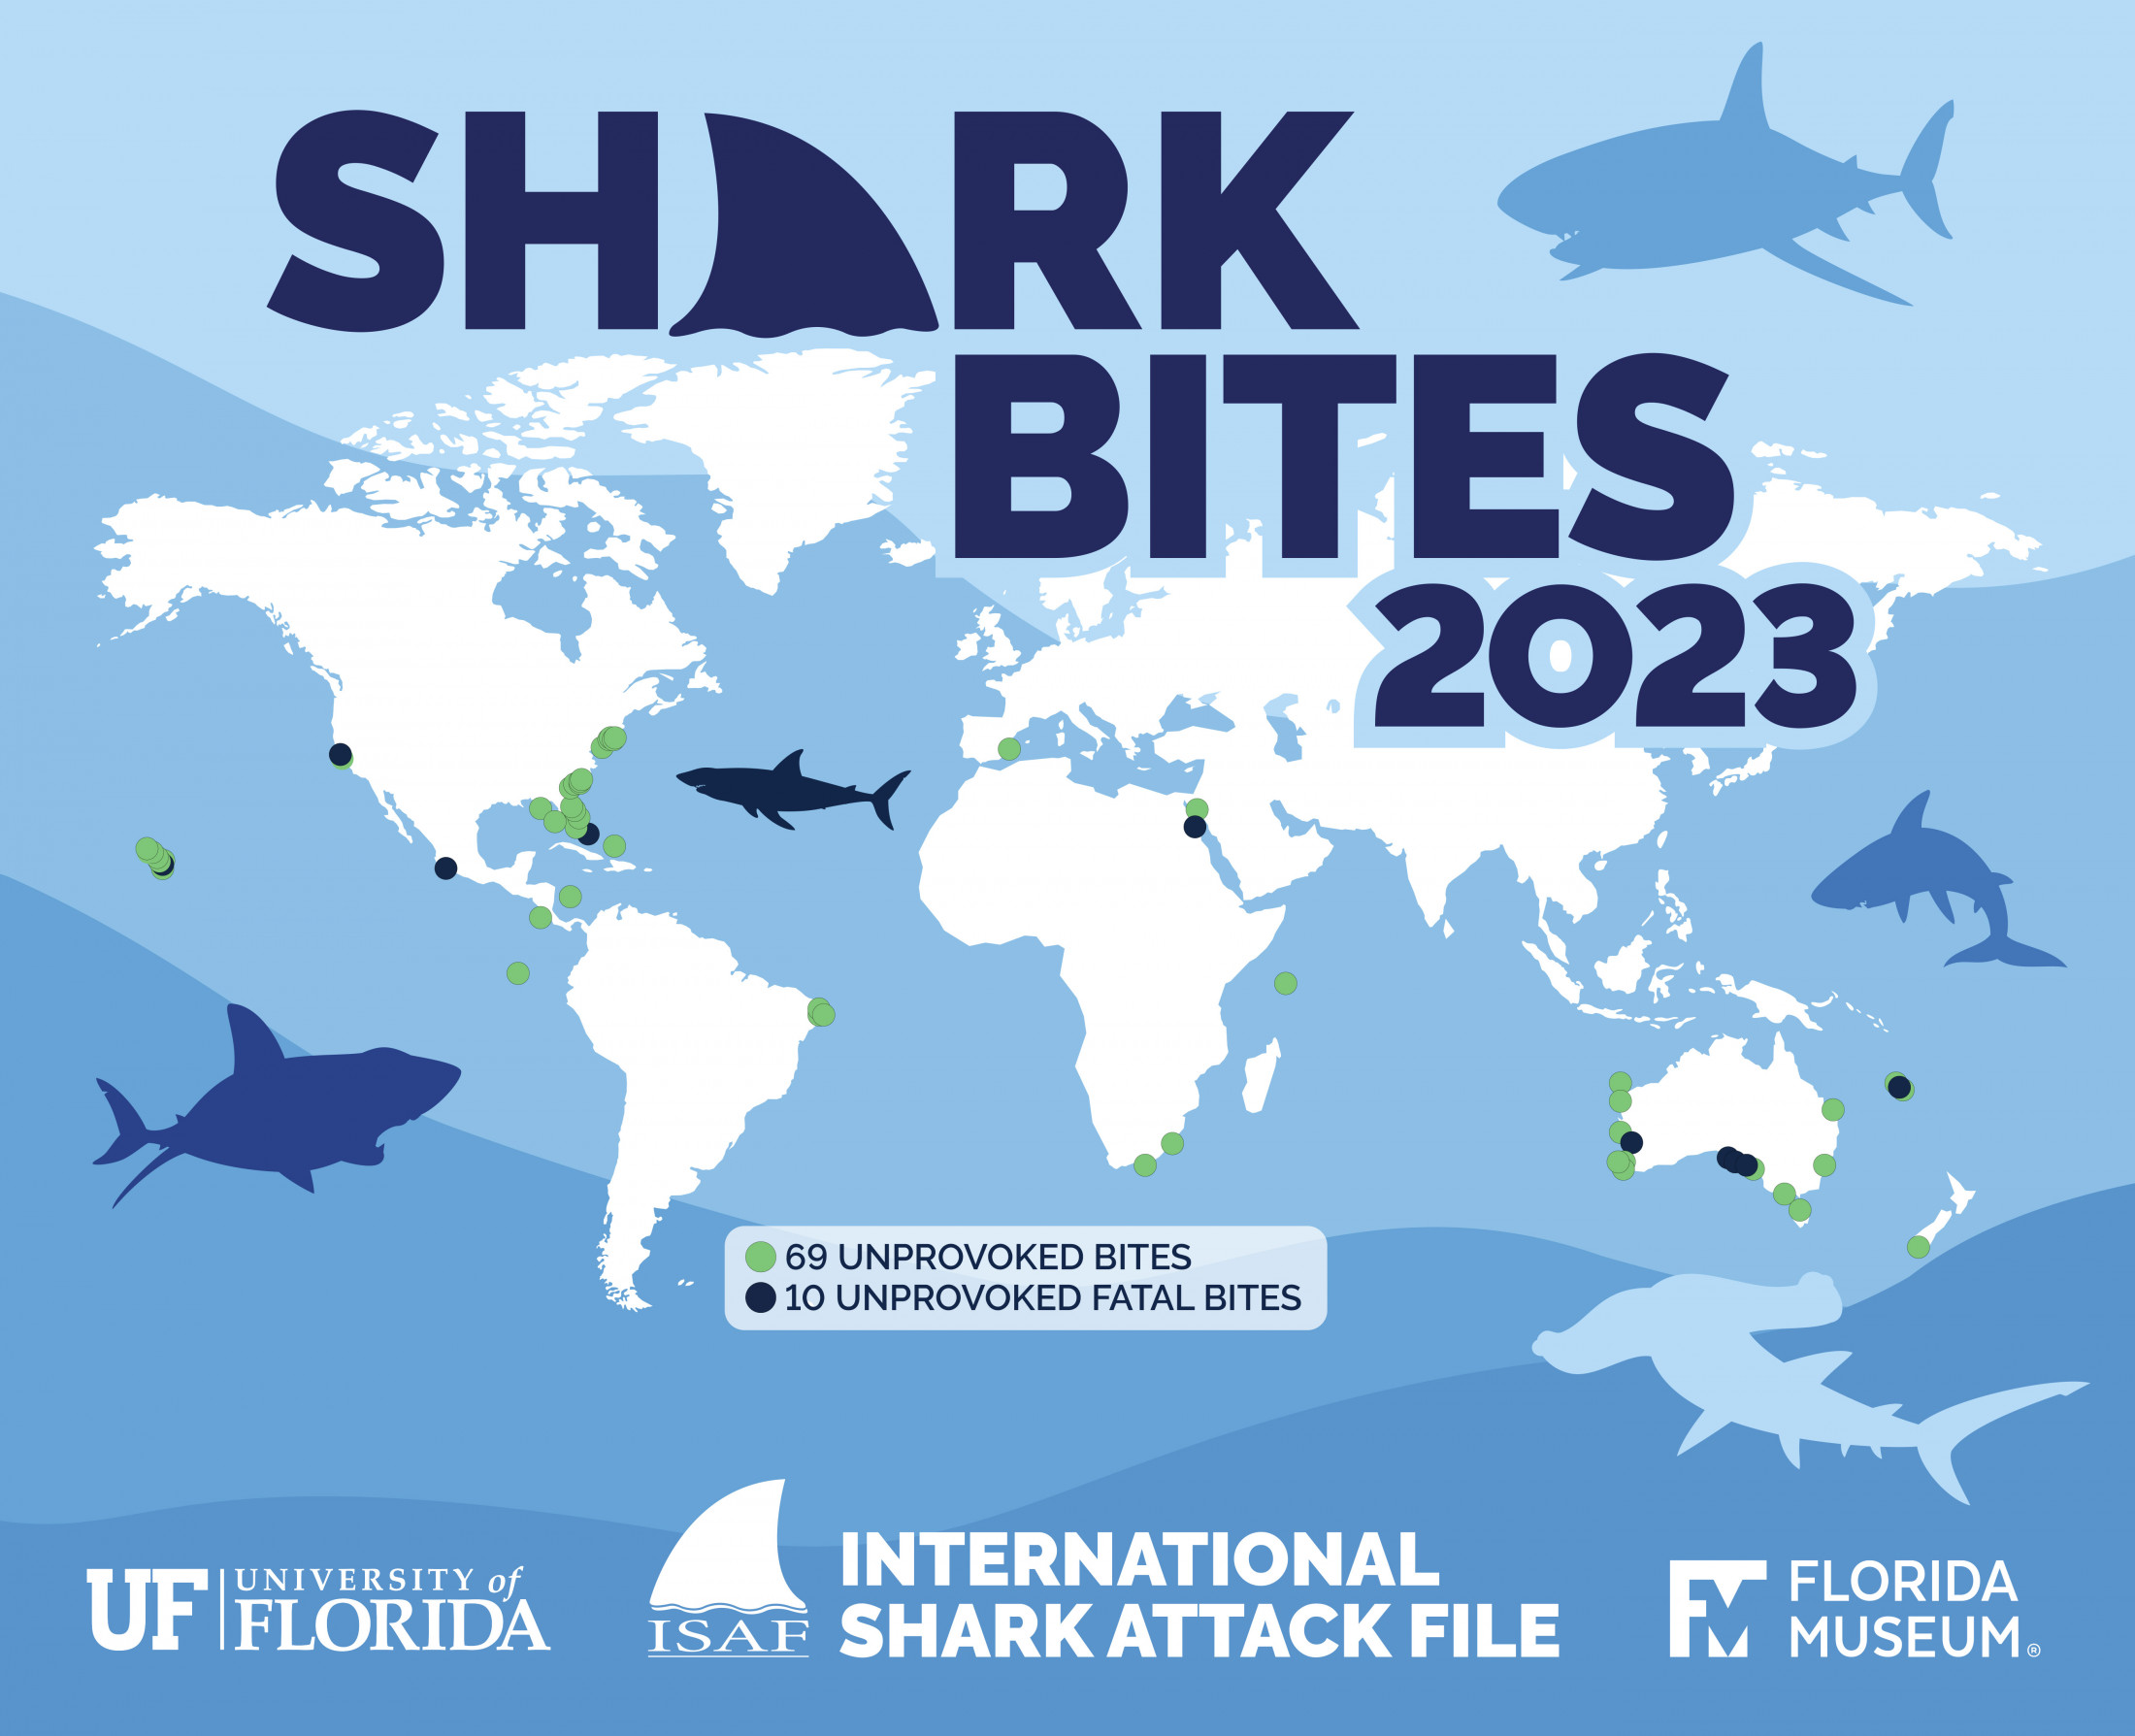 A map with dots placed at the location of every unprovoked shark bite in 2023.